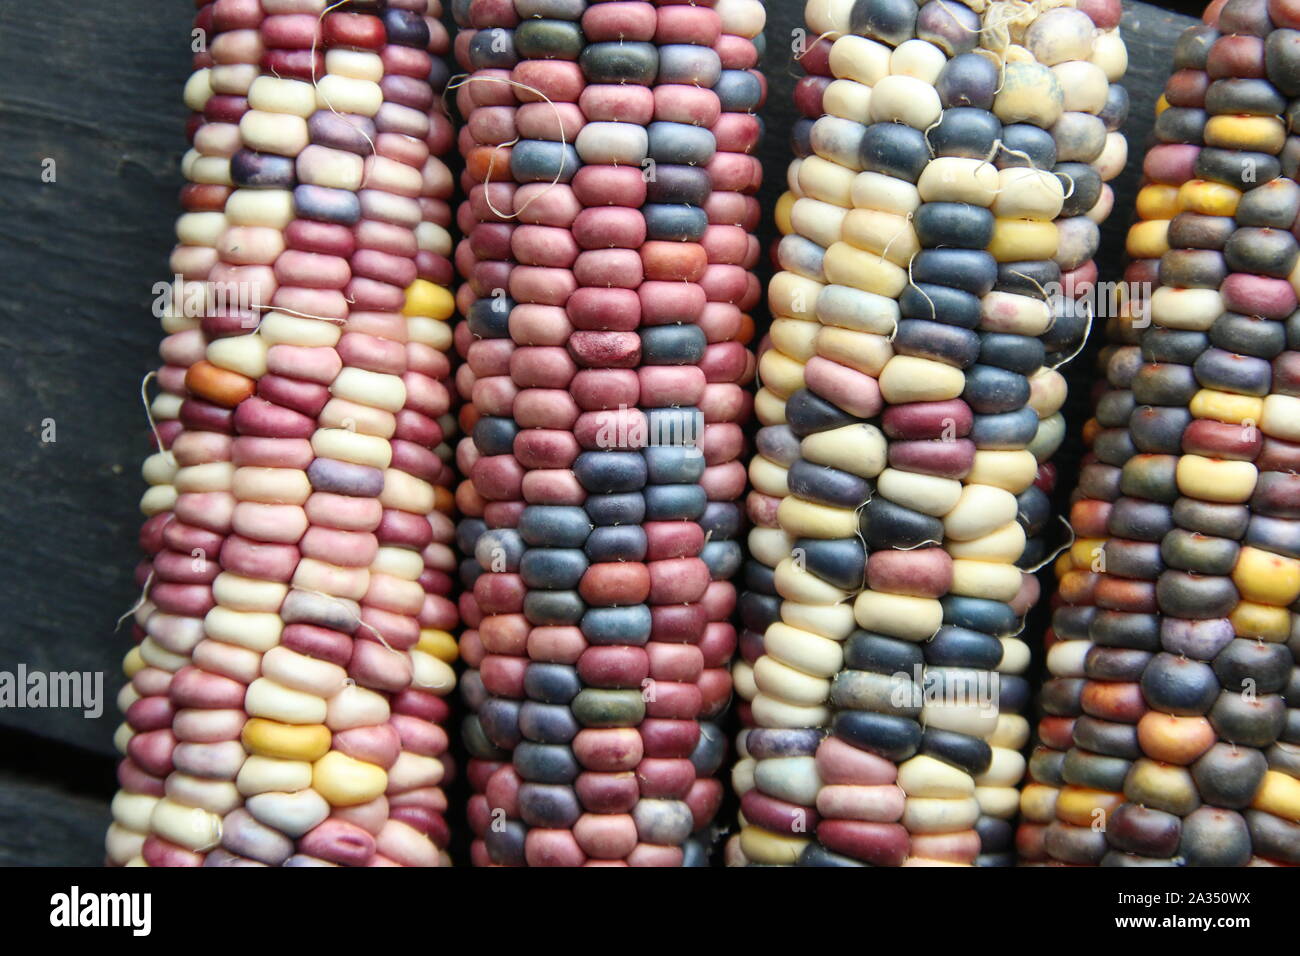 Multi-colored corn lies on the old vintage table.  Stock Photo